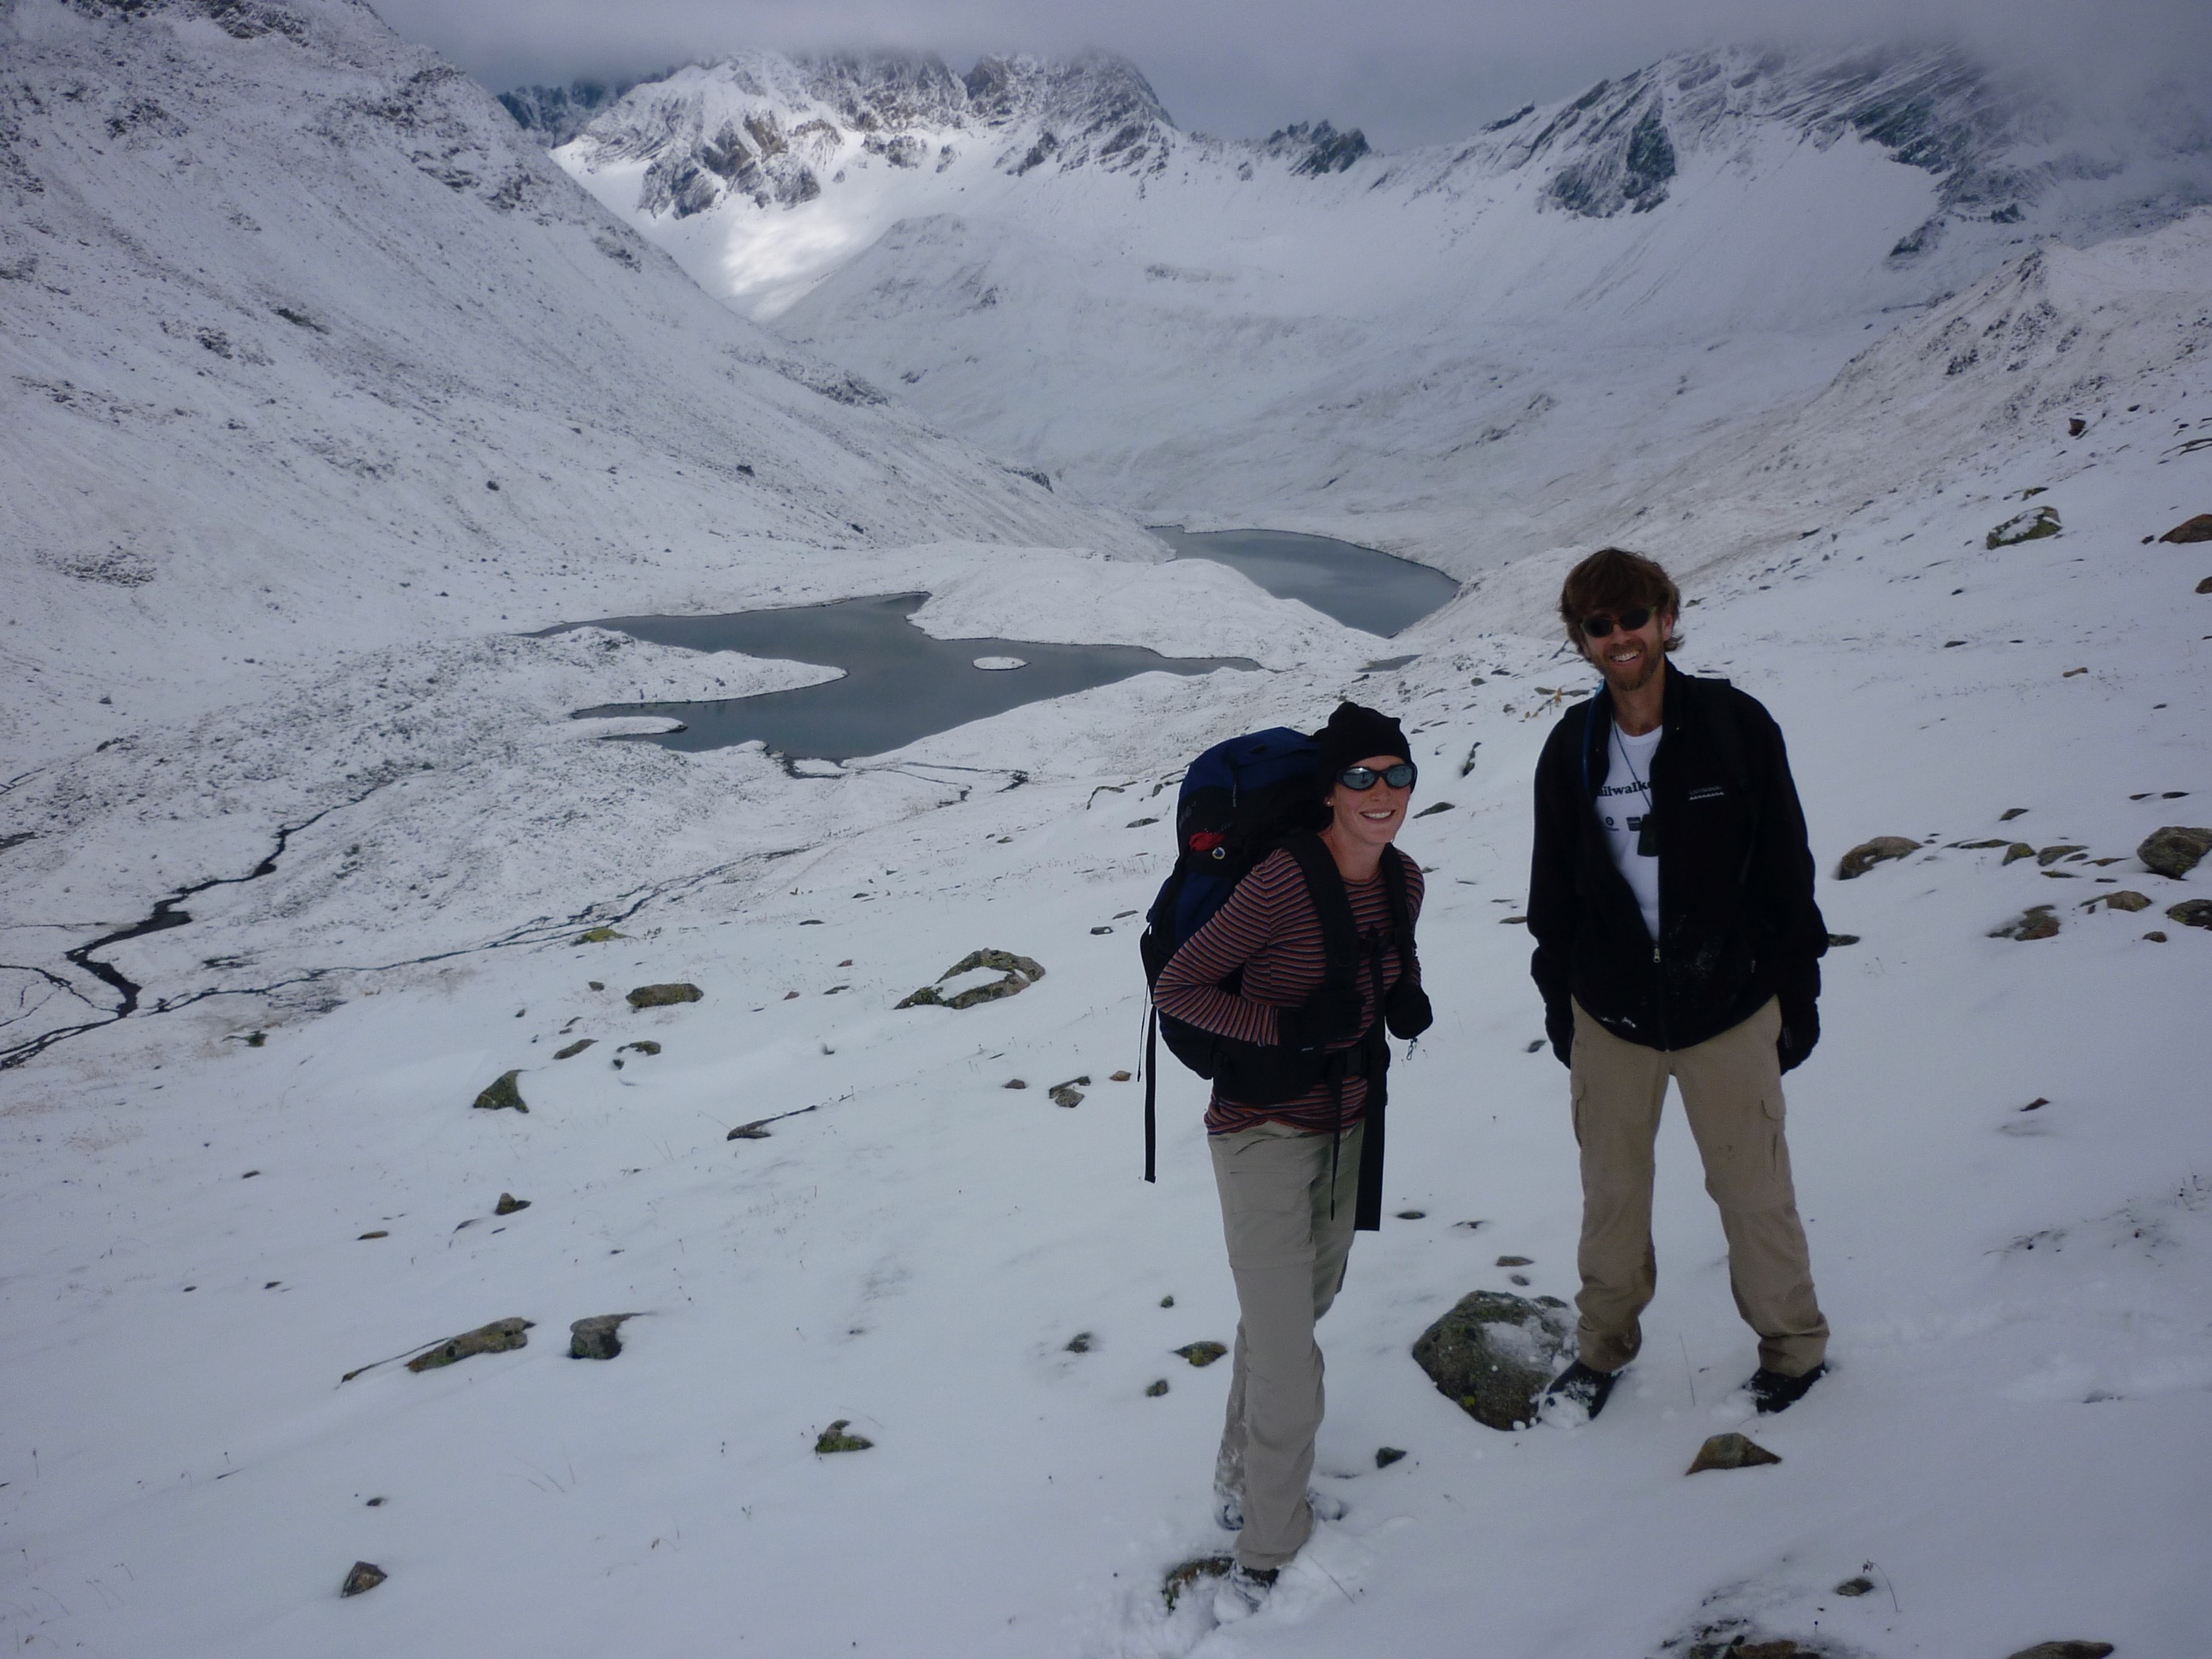 Tanja and Quentin nearing Sertigpass with the Lai da Ravais-ch in the background.